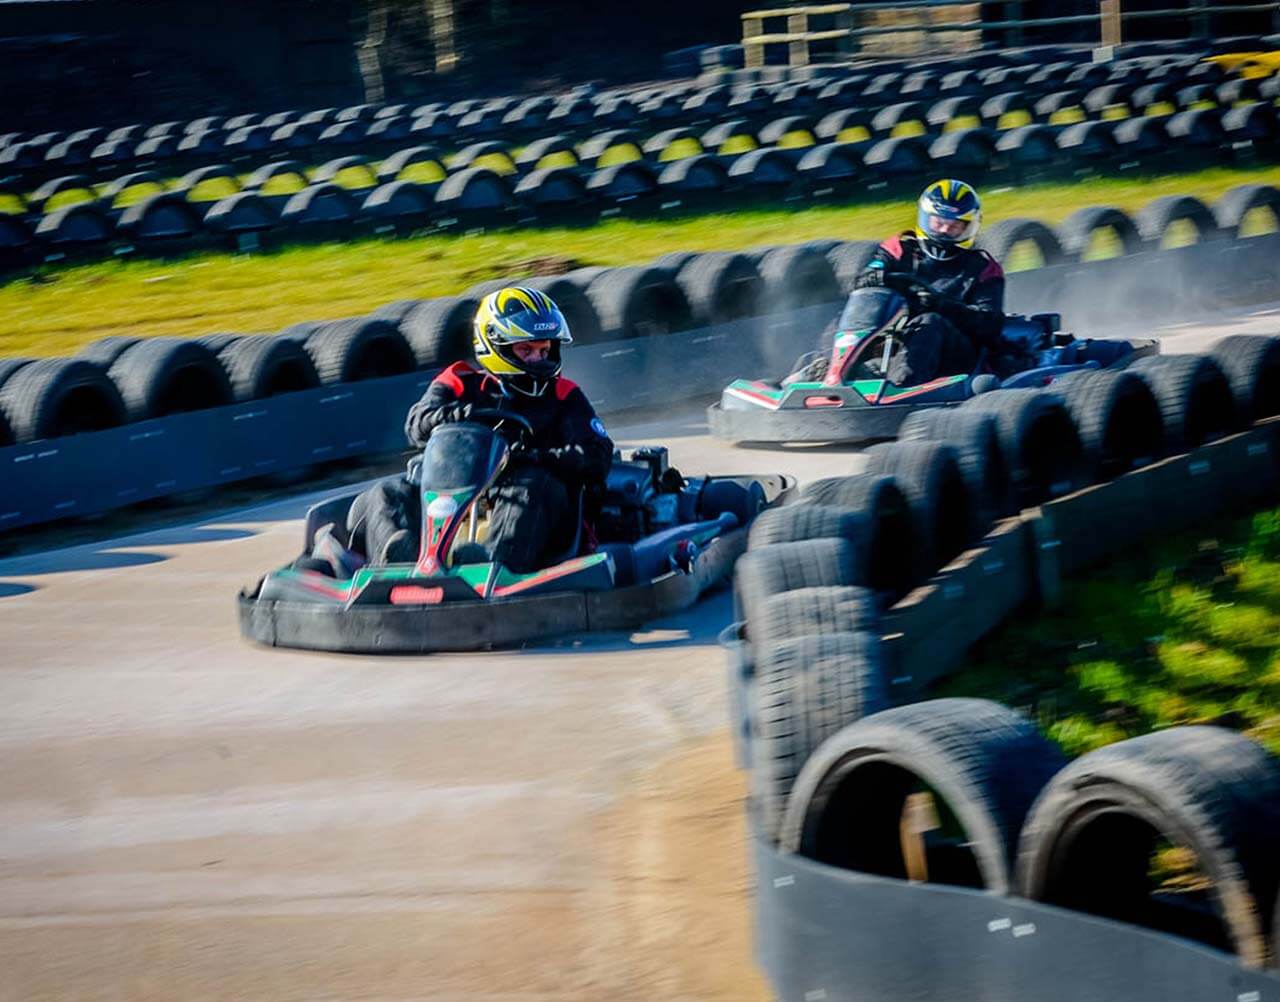 A couple of go karts racing around a track